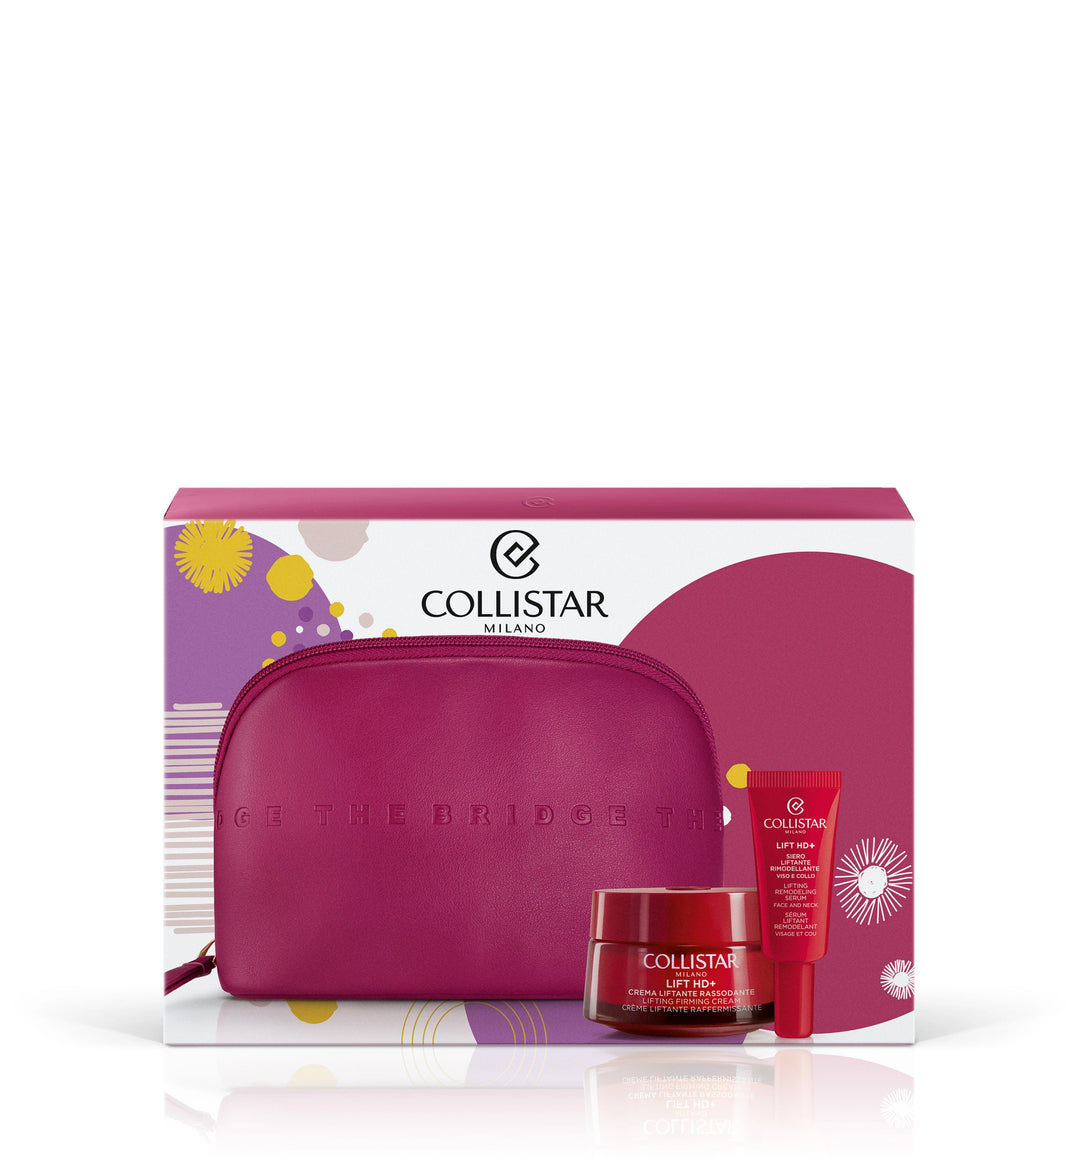 

Collistar Lift HD+ Gift Set includes a 50 ml Lifting Firming Cream, a 7 ml Lifting and Remodelling Serum for Face and Neck, and a beauty bag from The Bridge brand.